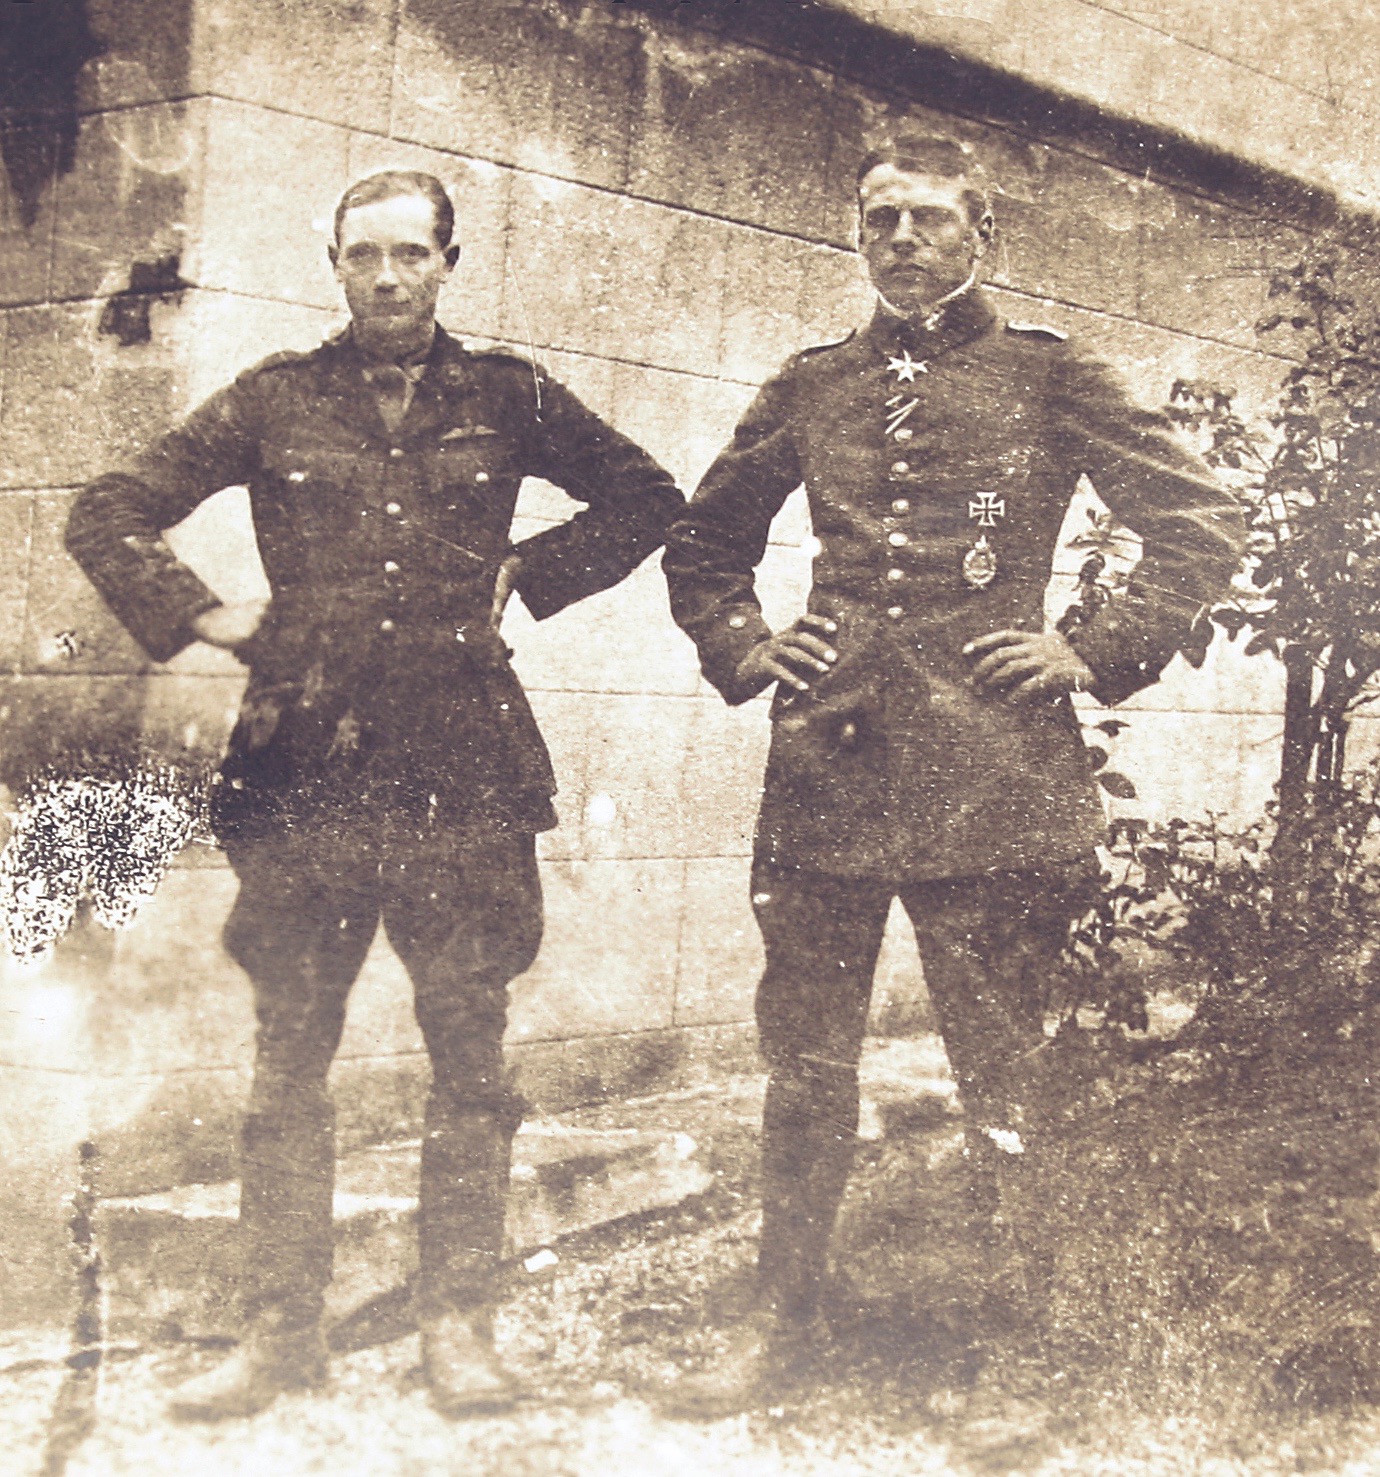 Boelcke (right) poses for a photograph with Captain Robert E. Wilson of the Royal Flying Corps, whom he shot down in 1916.(C&T Auctions, Bournemouth News & Picture Service)